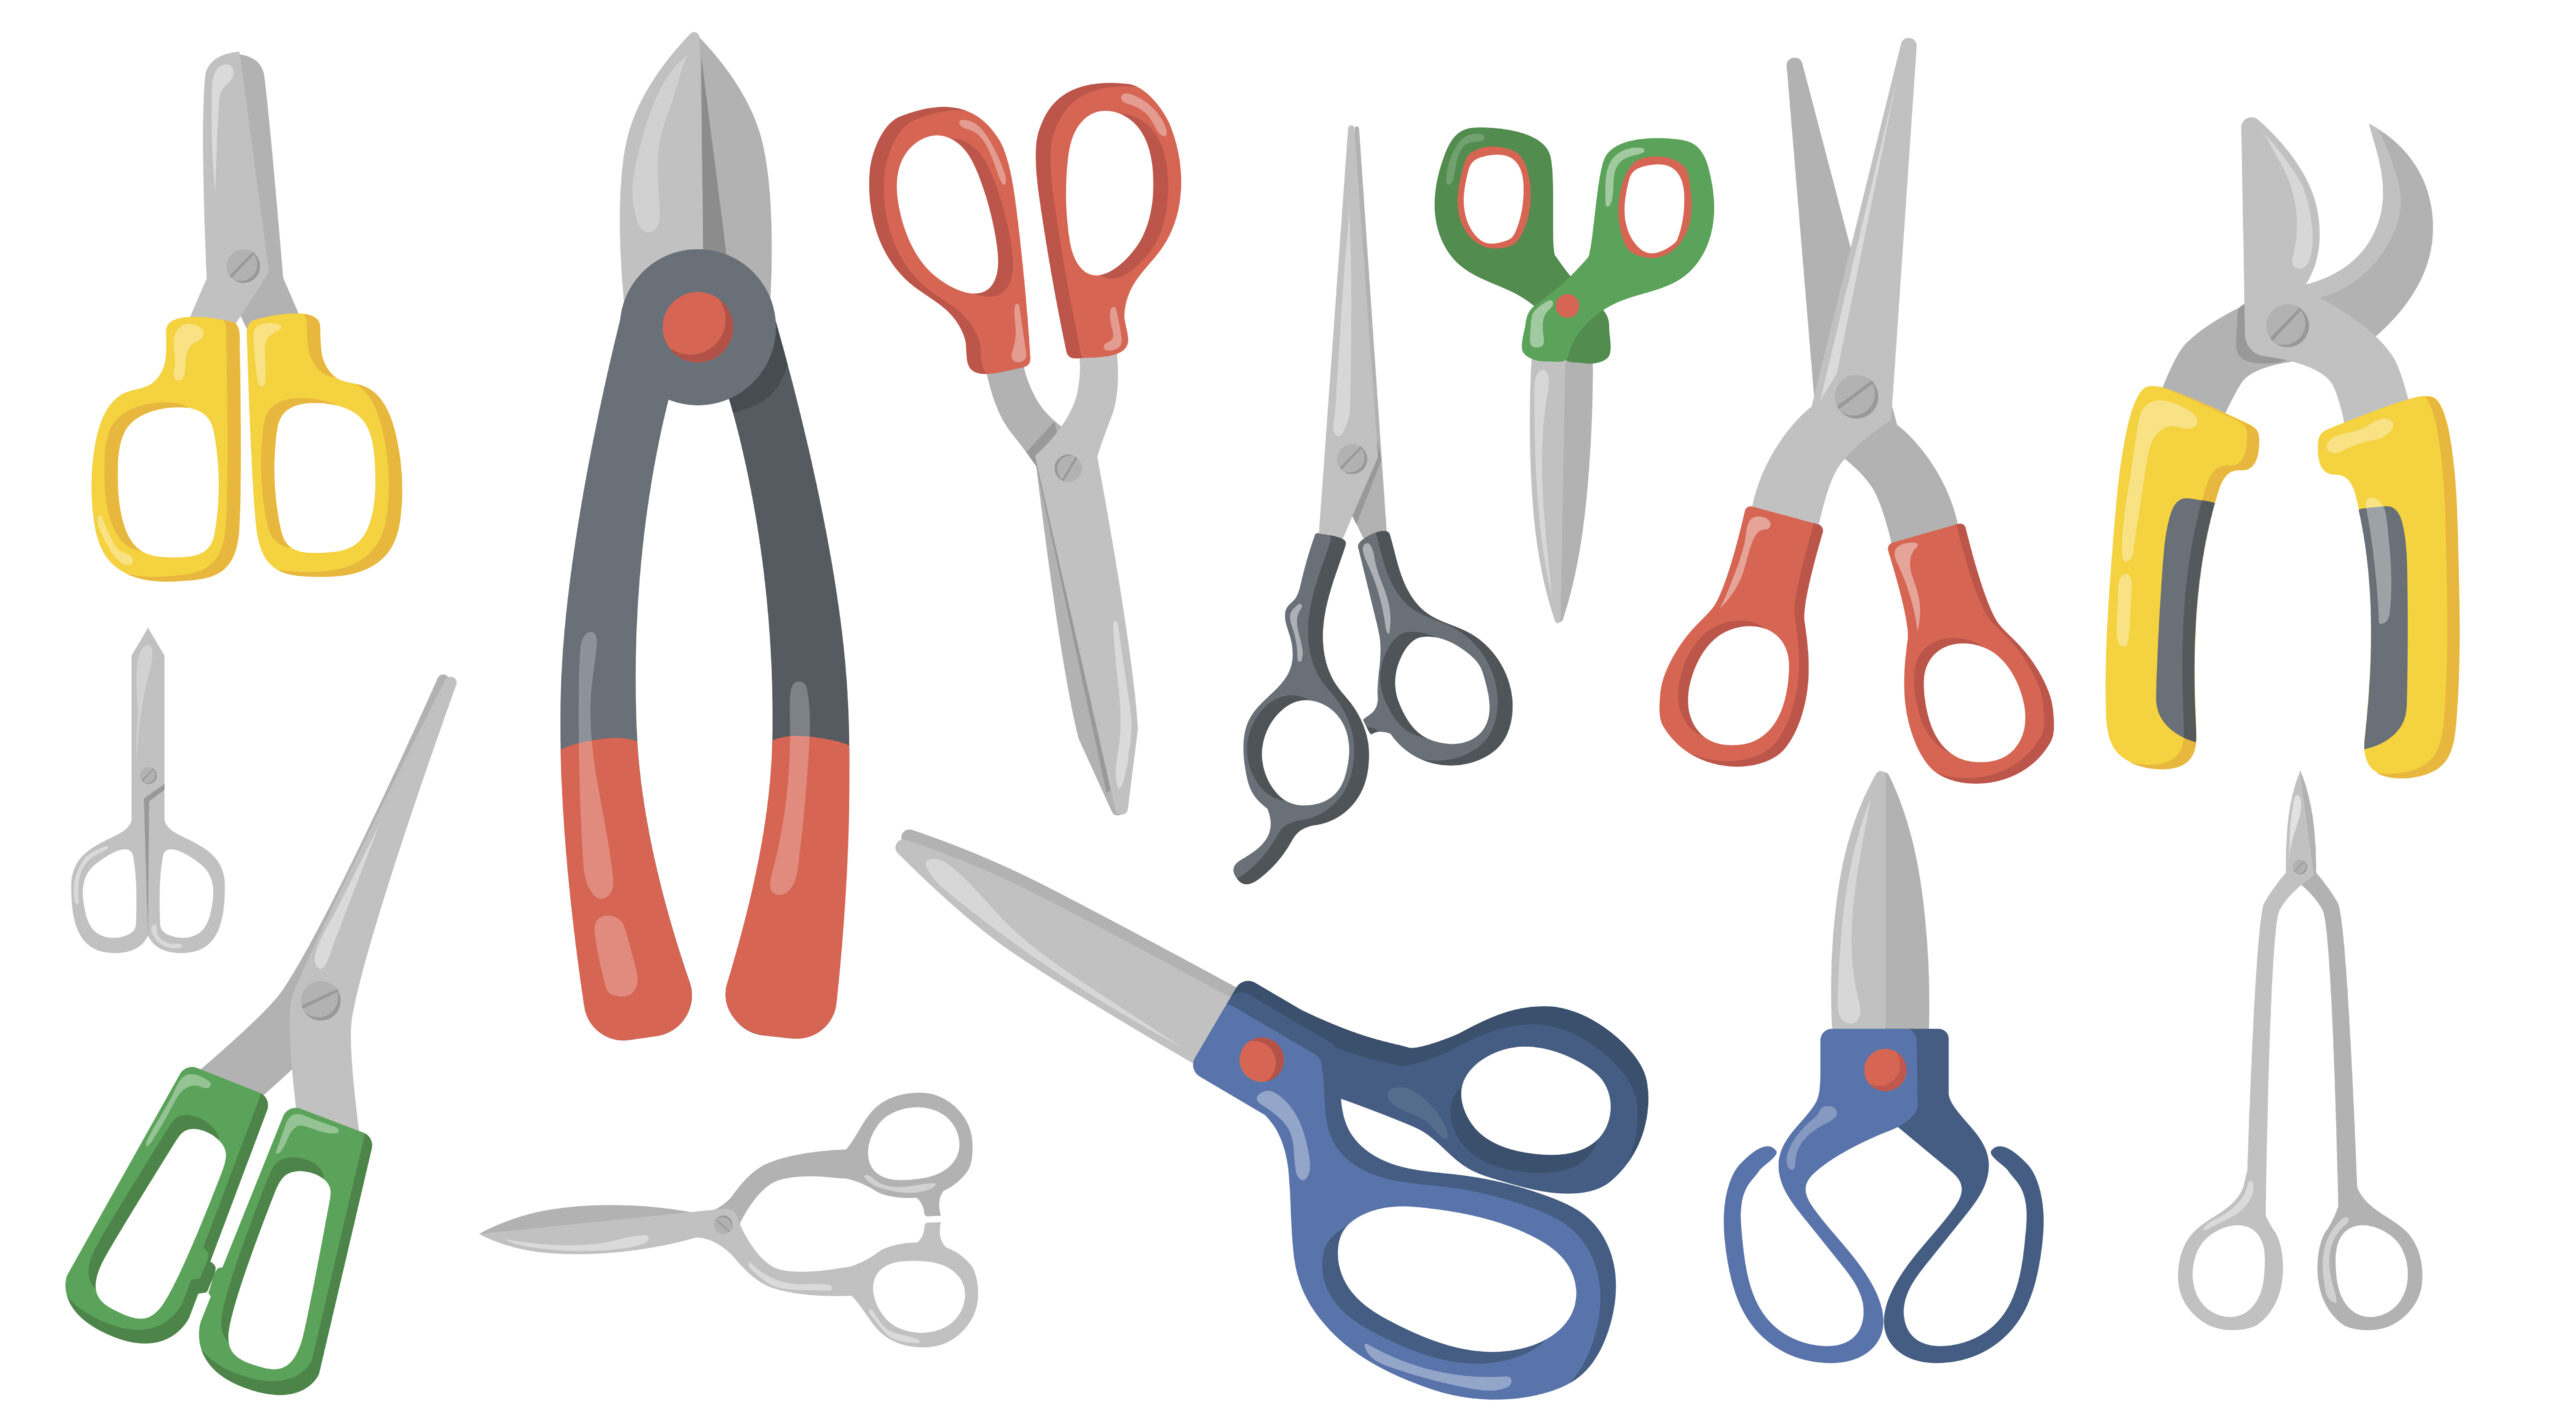 collection of various different Best Secateurs in a graphic image with white background